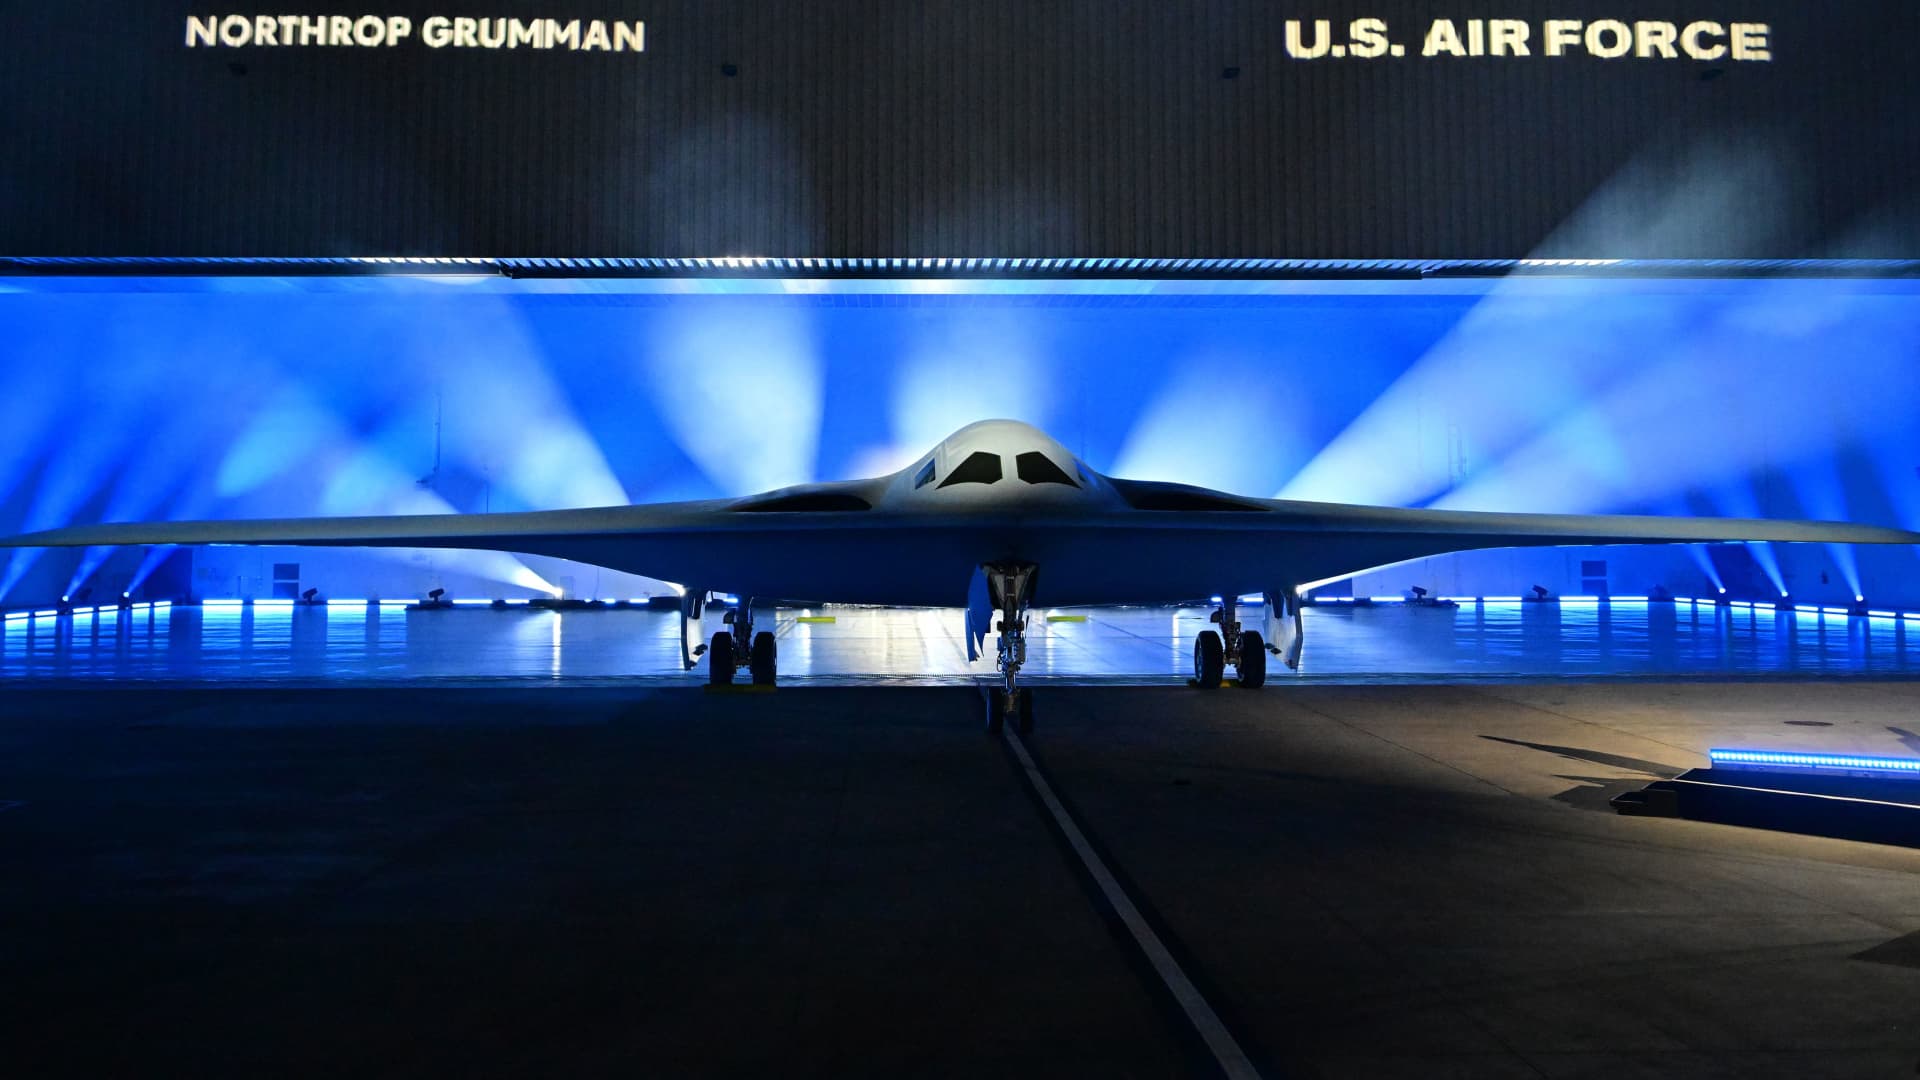 Pentagon debuts its new stealth bomber, the B-21 Raider - CNBC